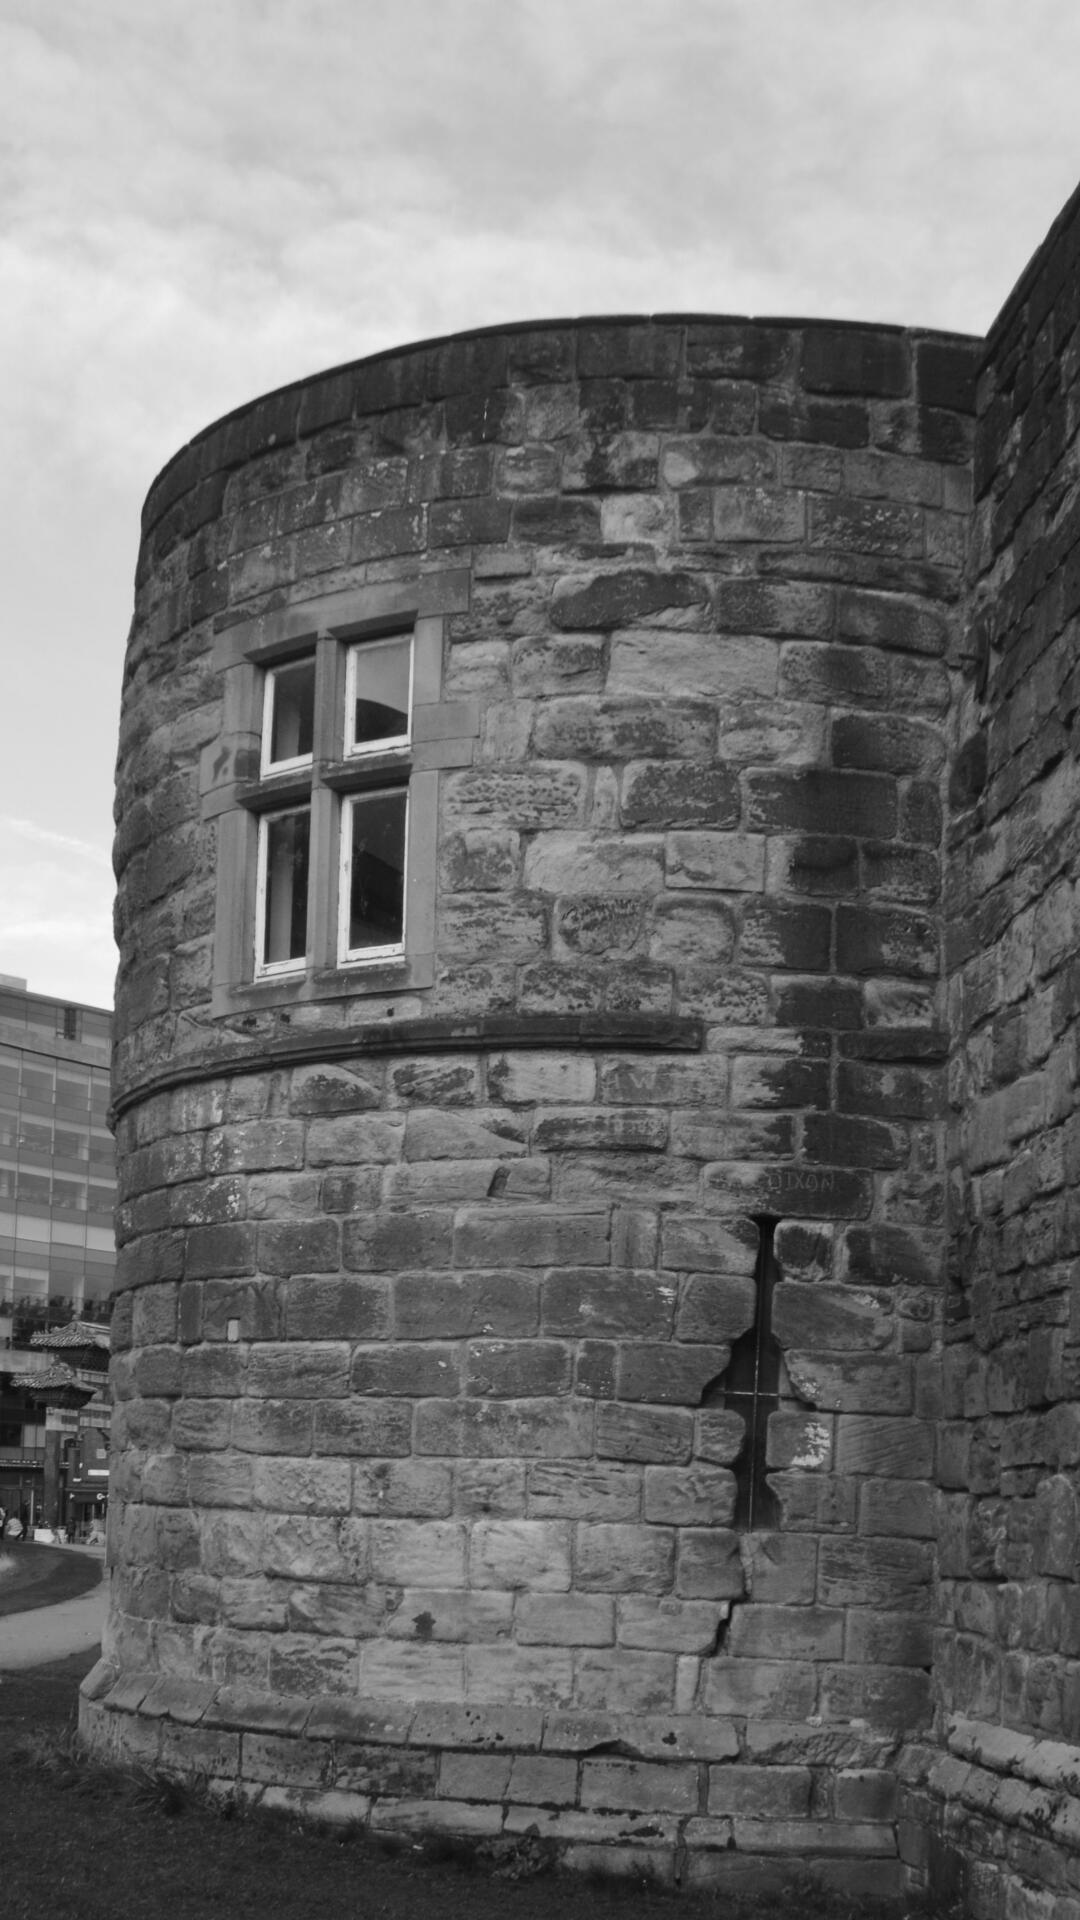 Black and white image of the Morden Tower, Newcastle